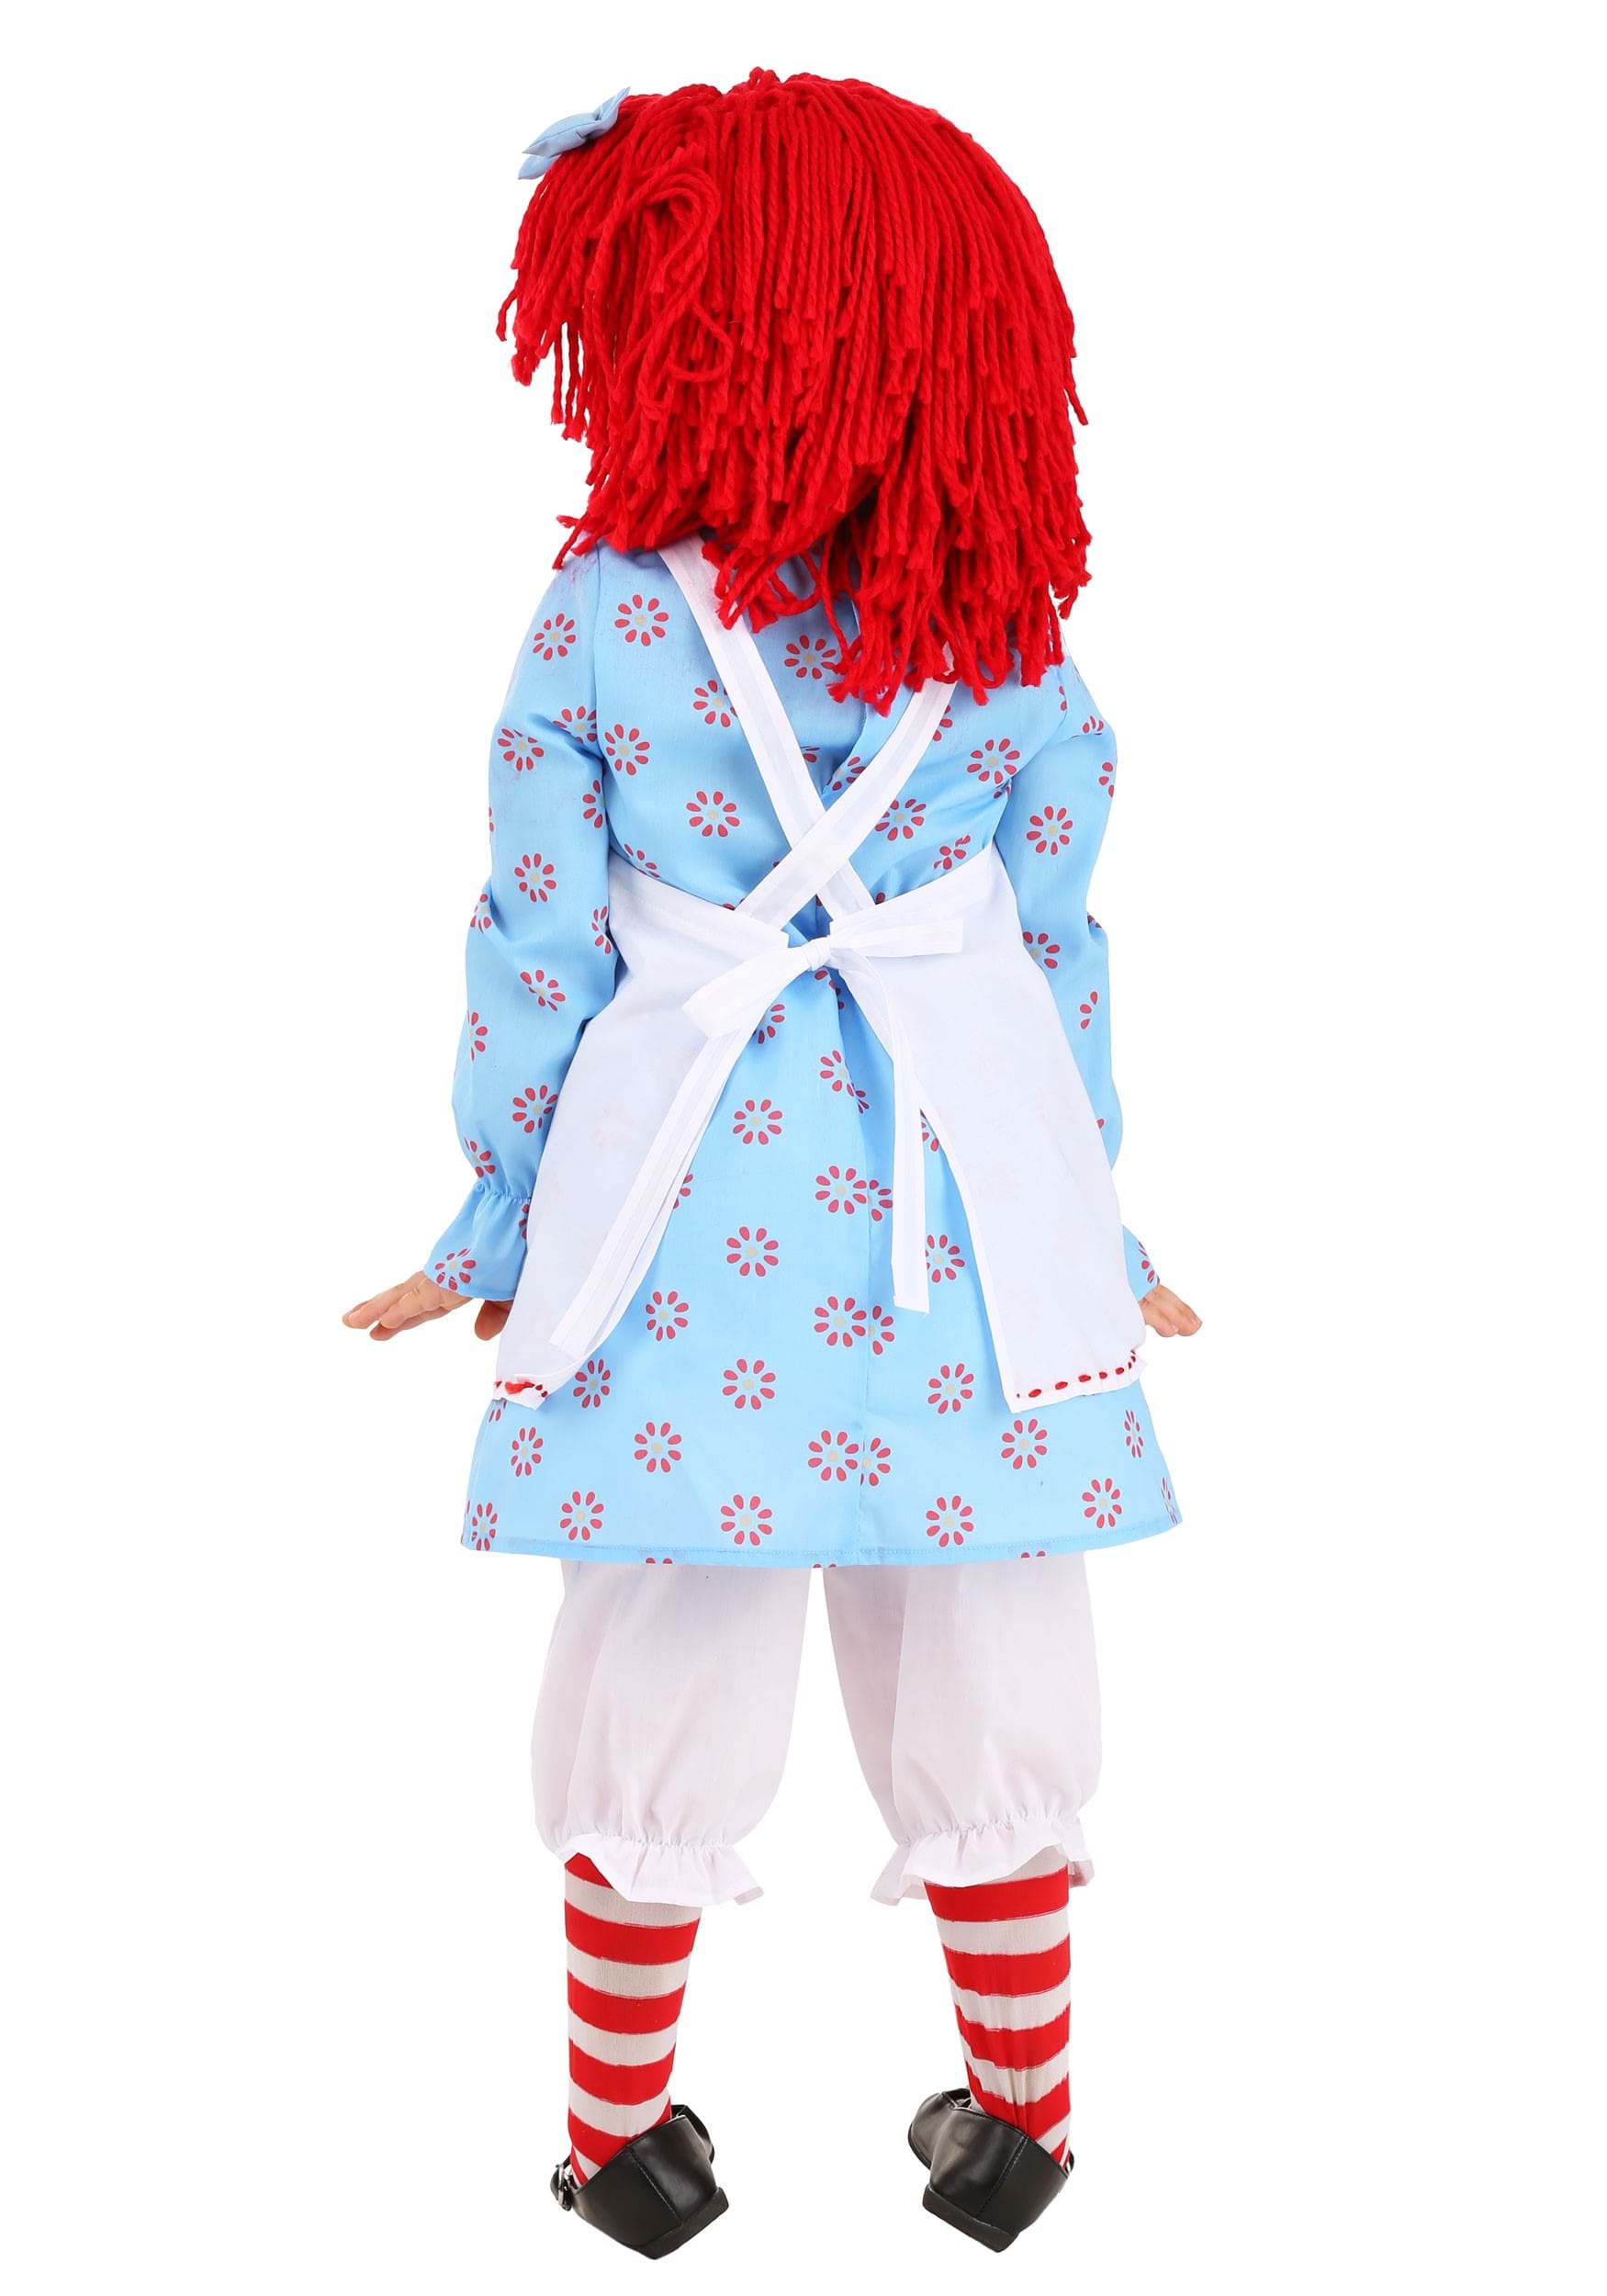 Exclusive Raggedy Ann Costume For Toddler's